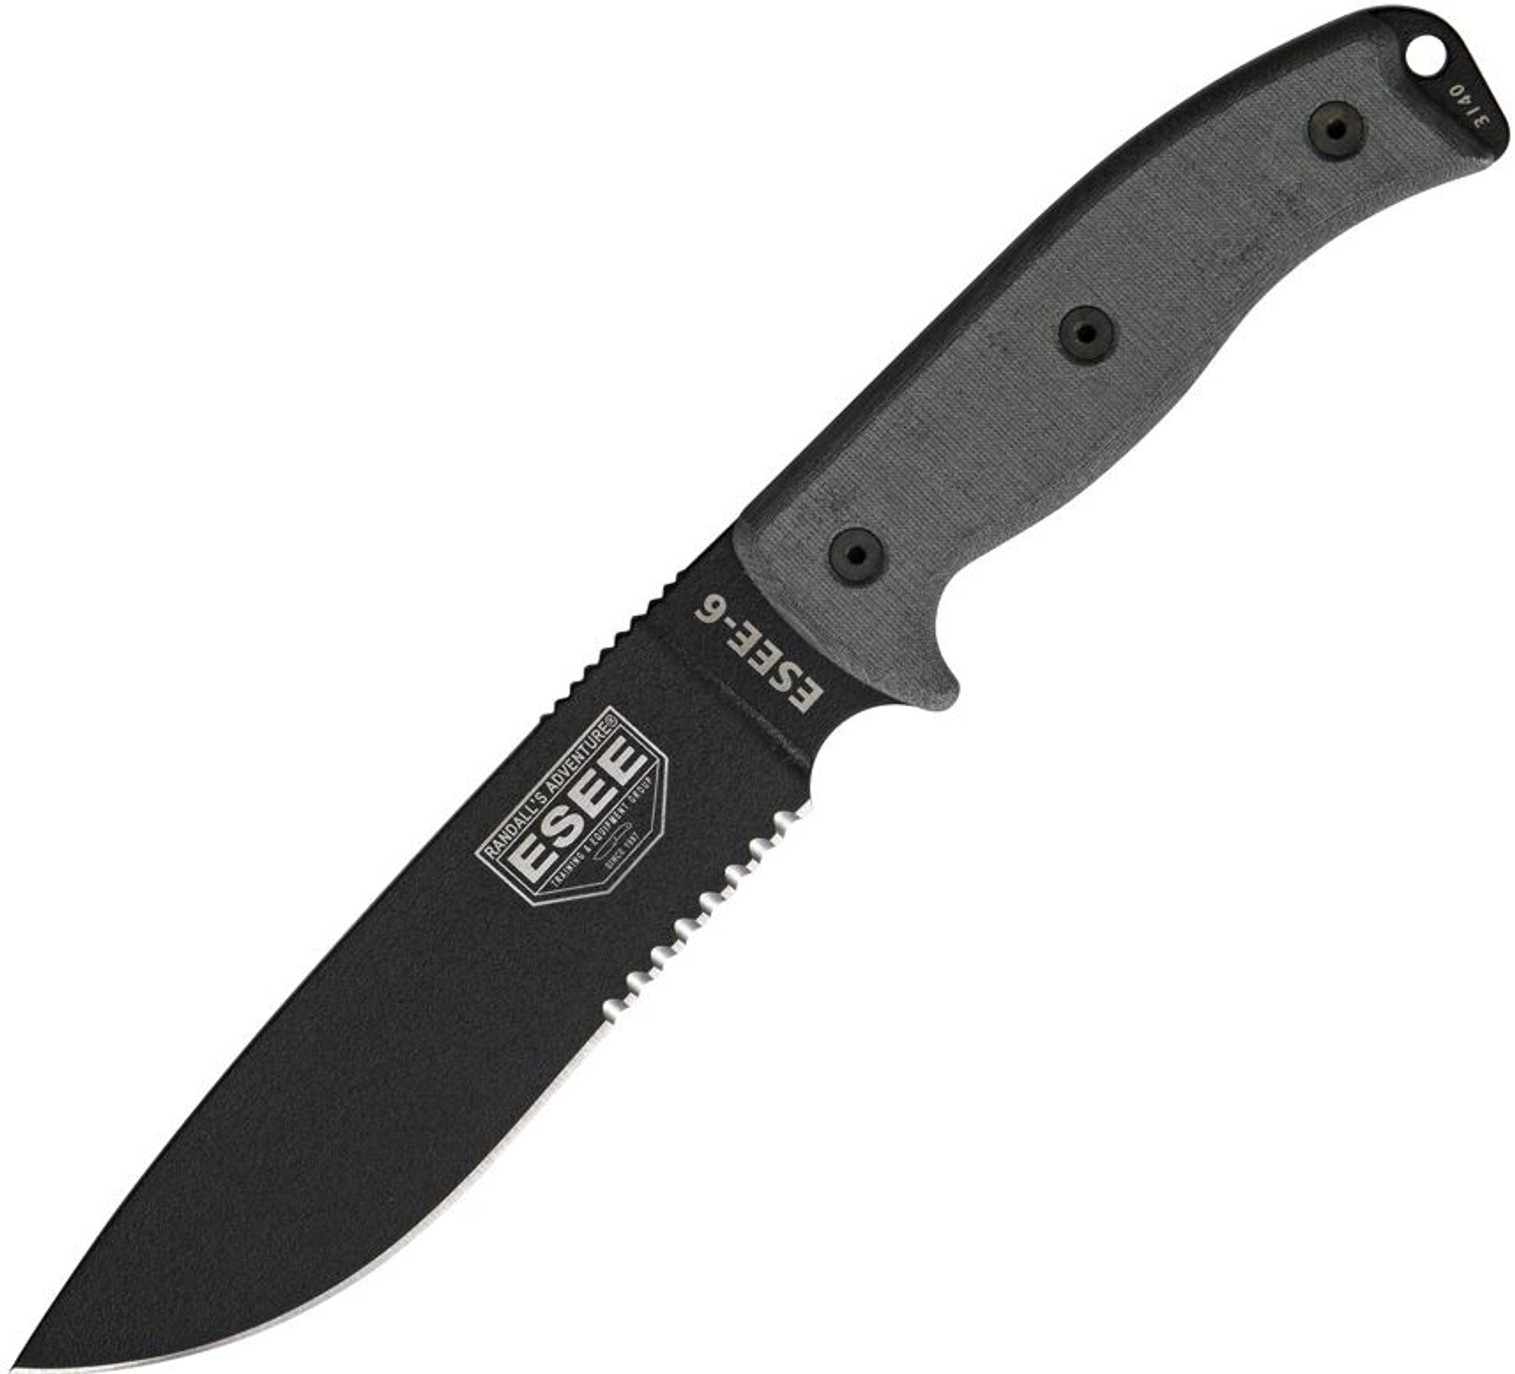 ESEE 6S Black Blade with Serration - Coyote Sheath